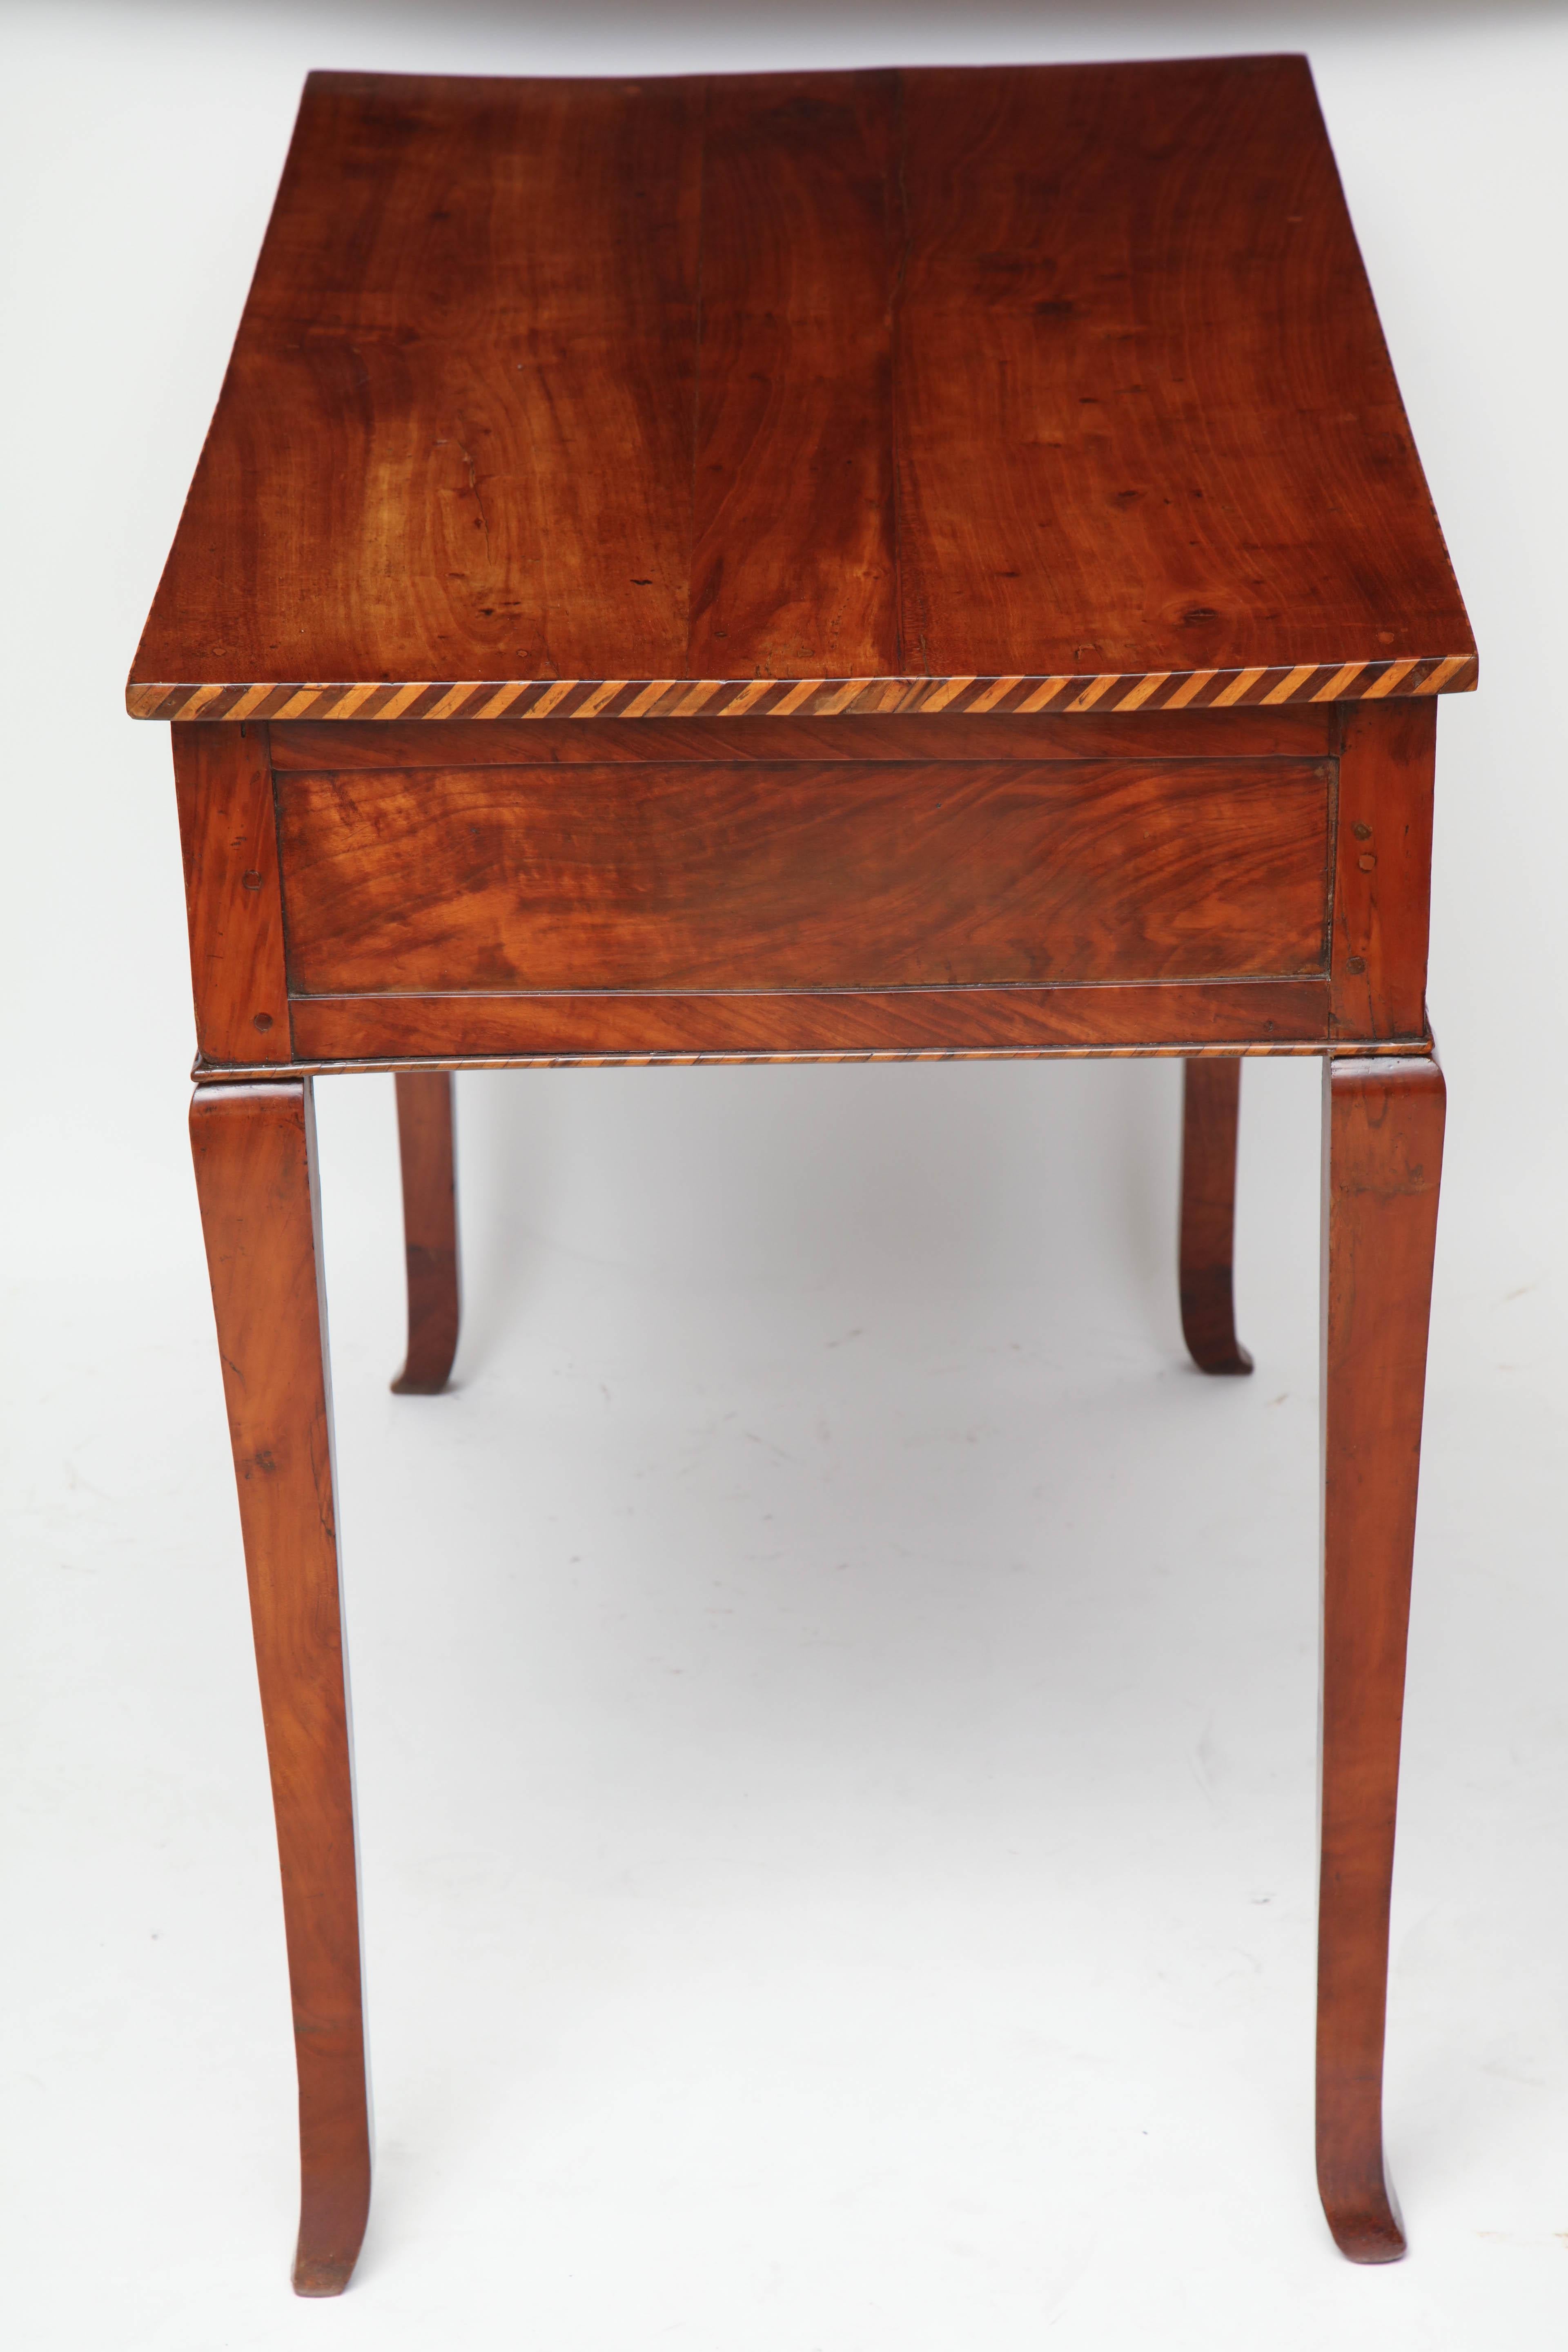 18th Century Italian Cherry Table with Parquetry Border and Two Drawers 8